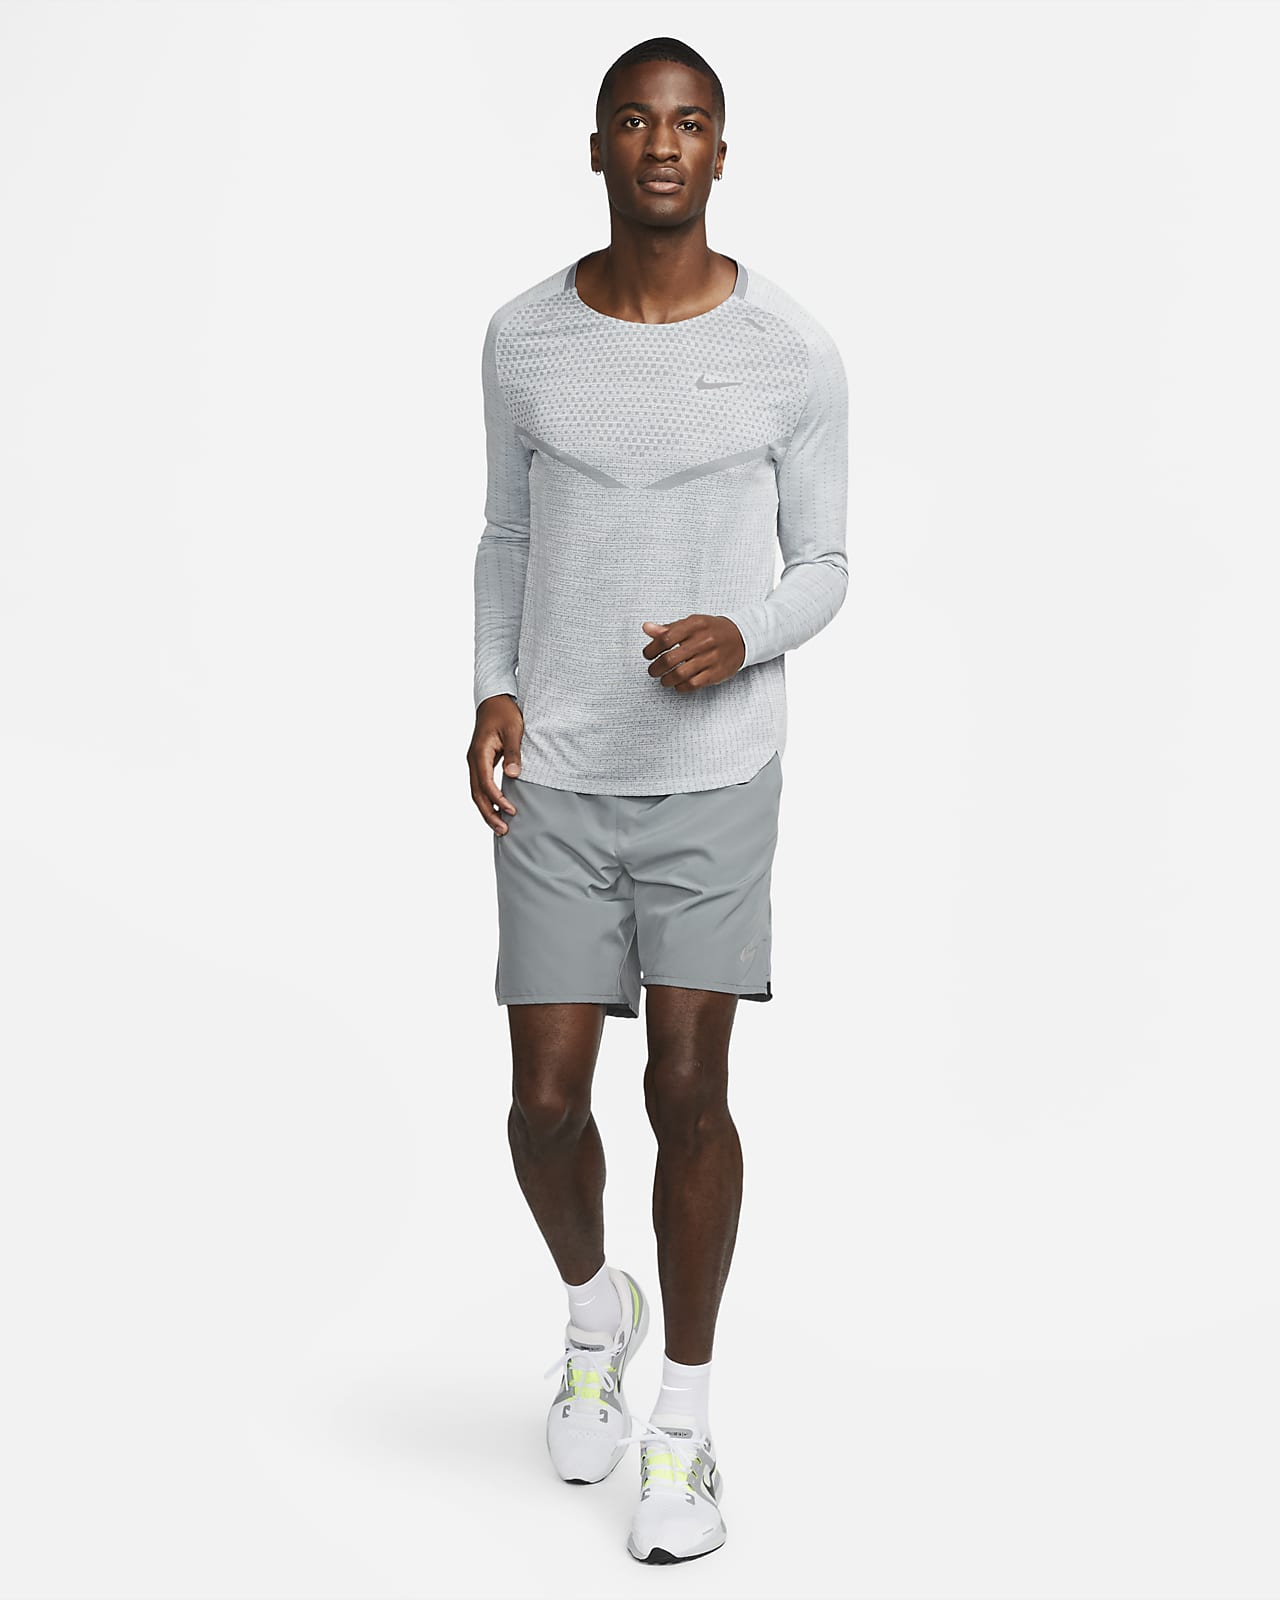 Nike Challenger Men's Dri-FIT 18cm (approx.) Brief-Lined Running Shorts.  Nike LU